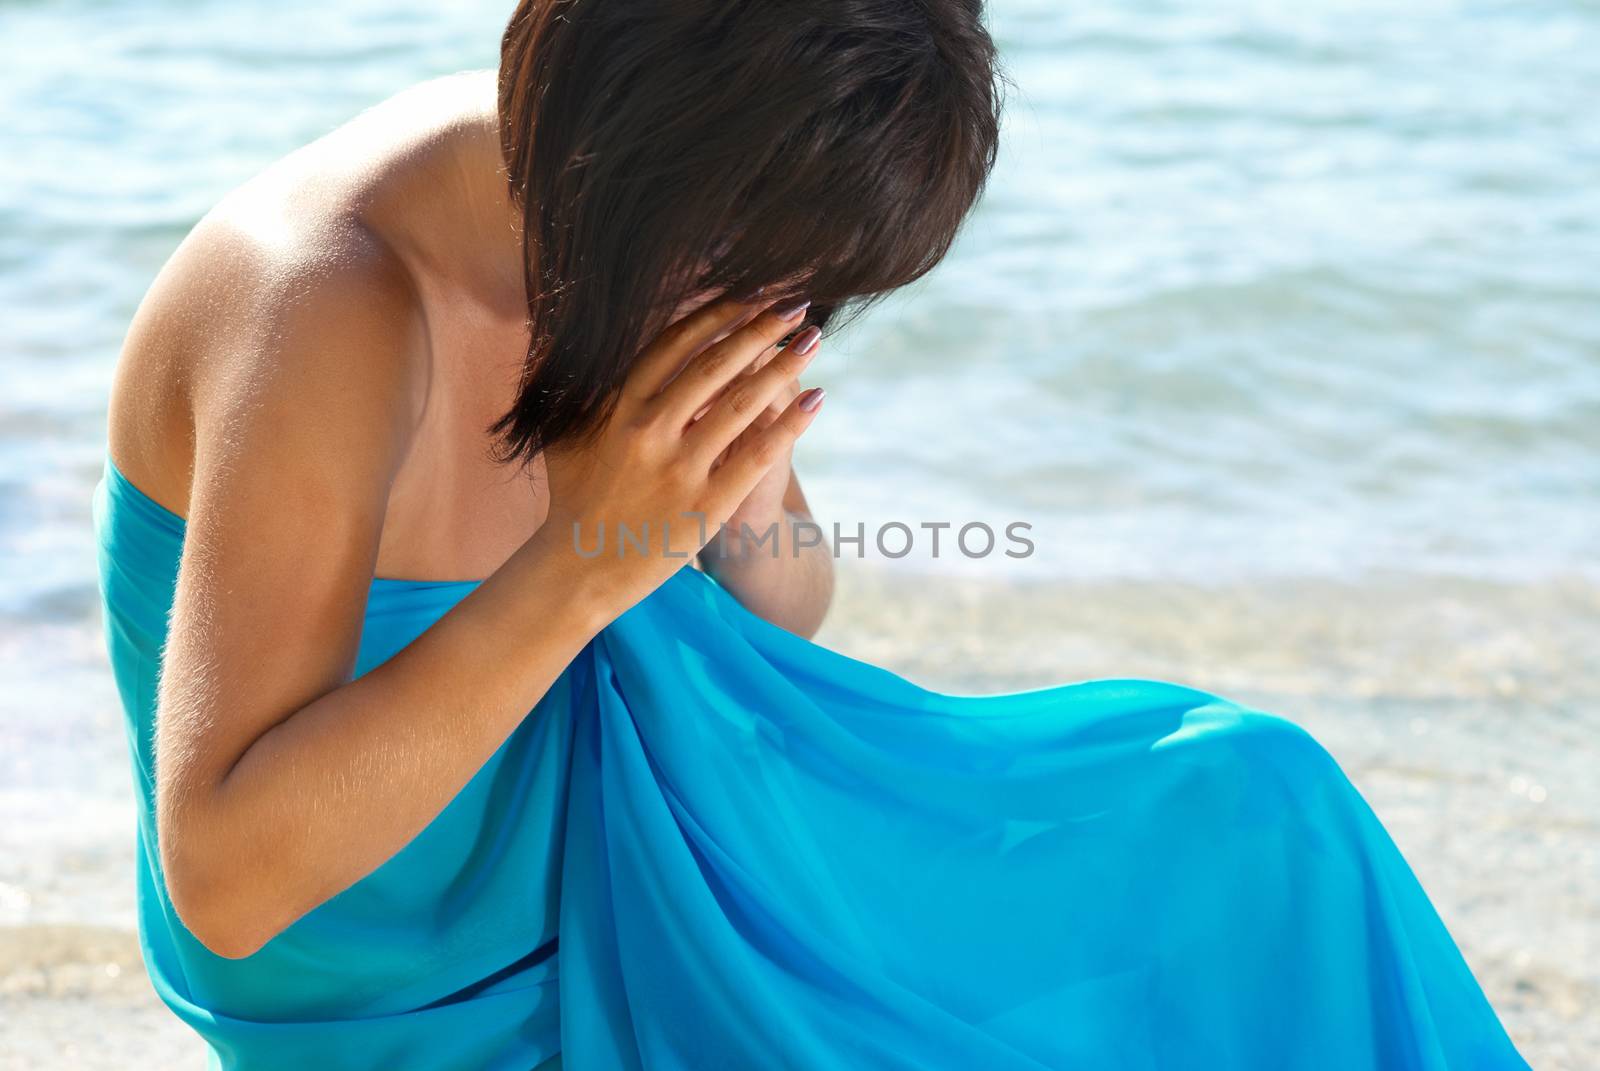 Young woman crying on the beach with water background